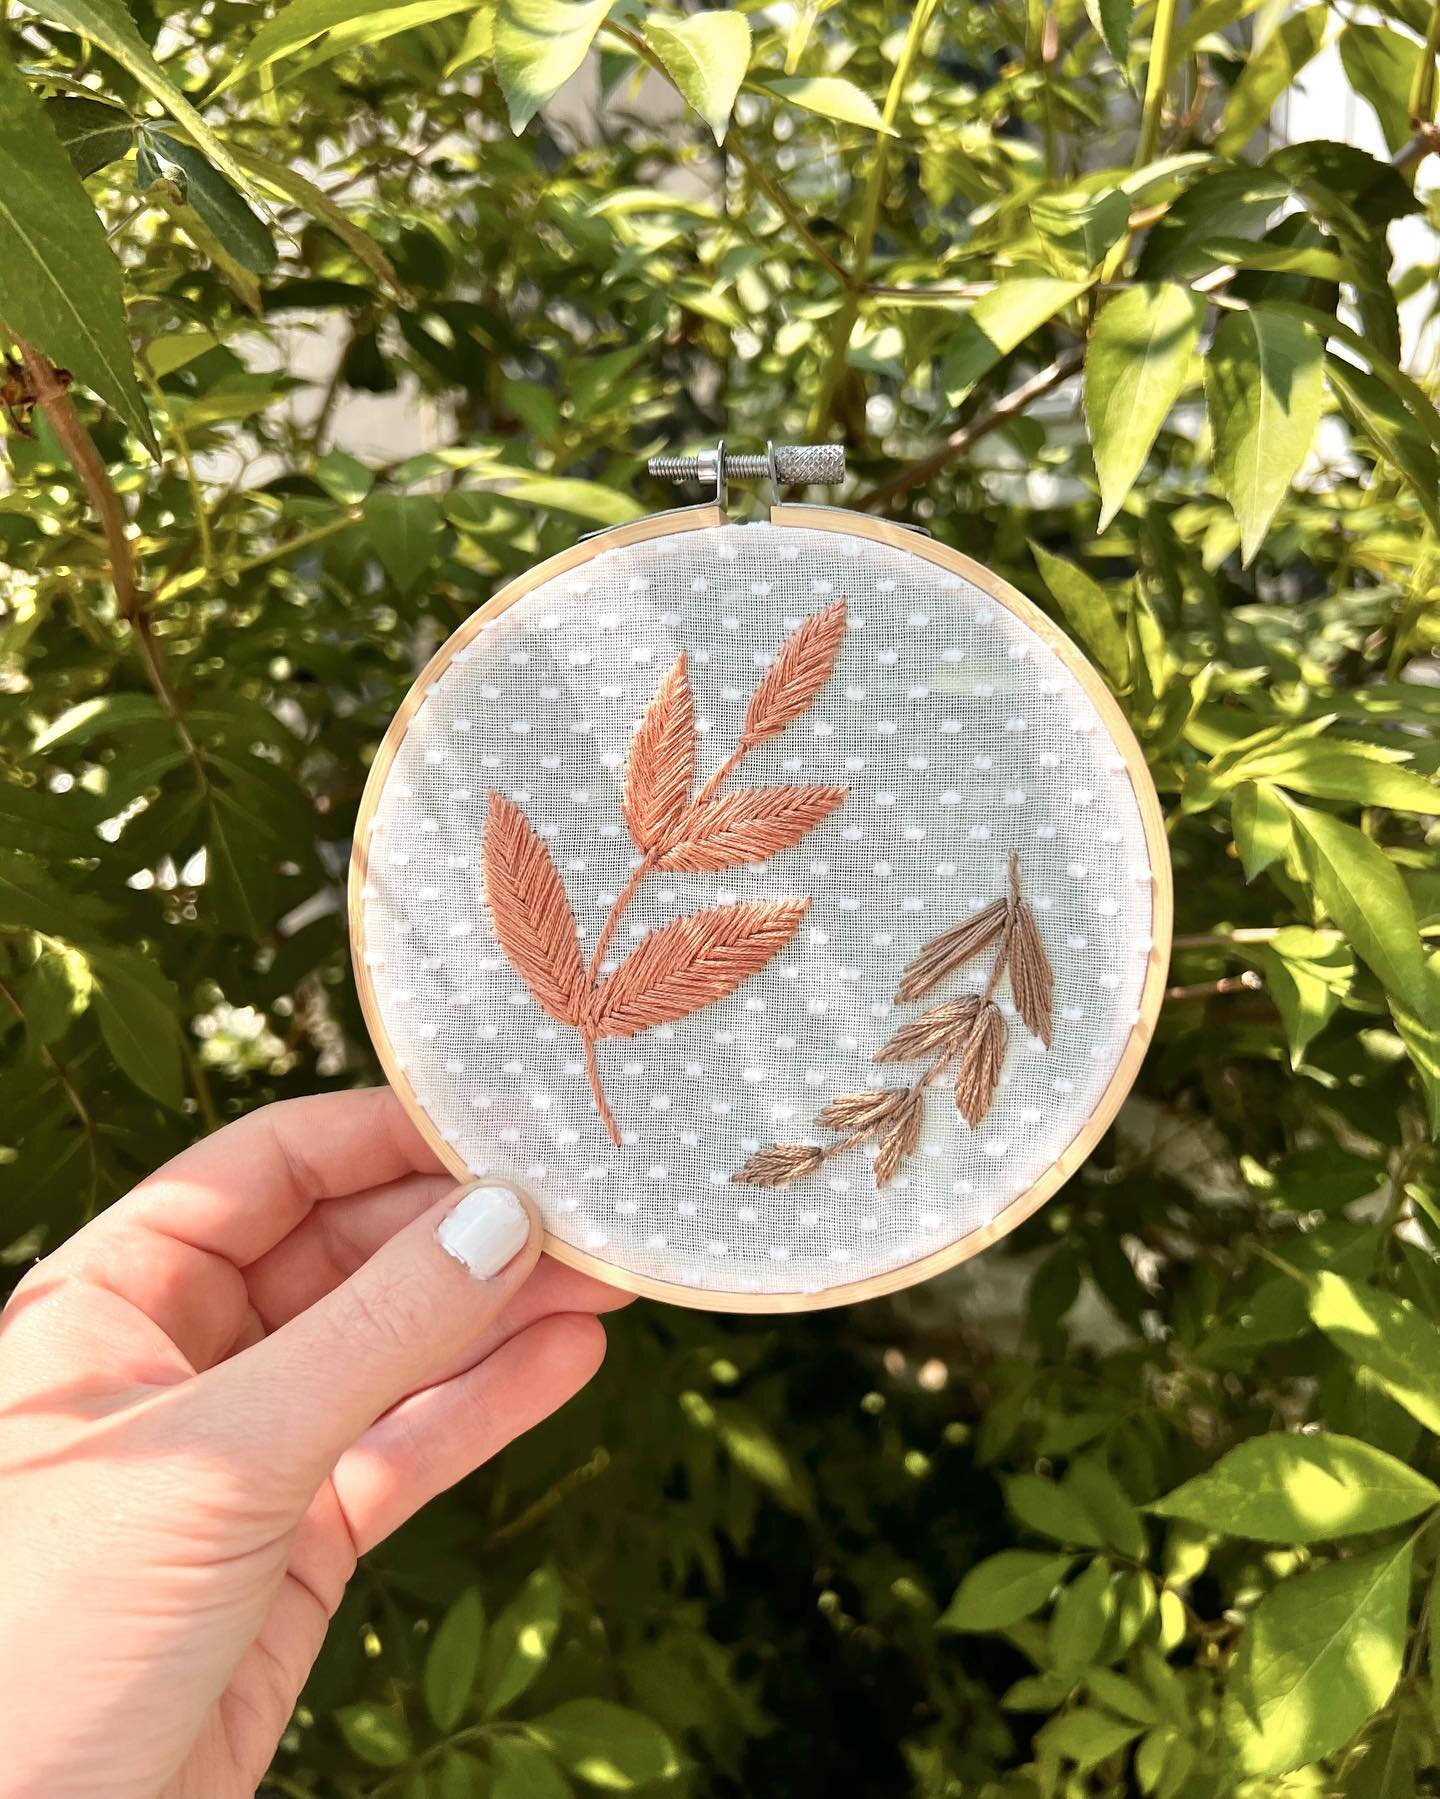 Double dancing fern hoop. 🌿✨

Couple new botanical babies in the shop!